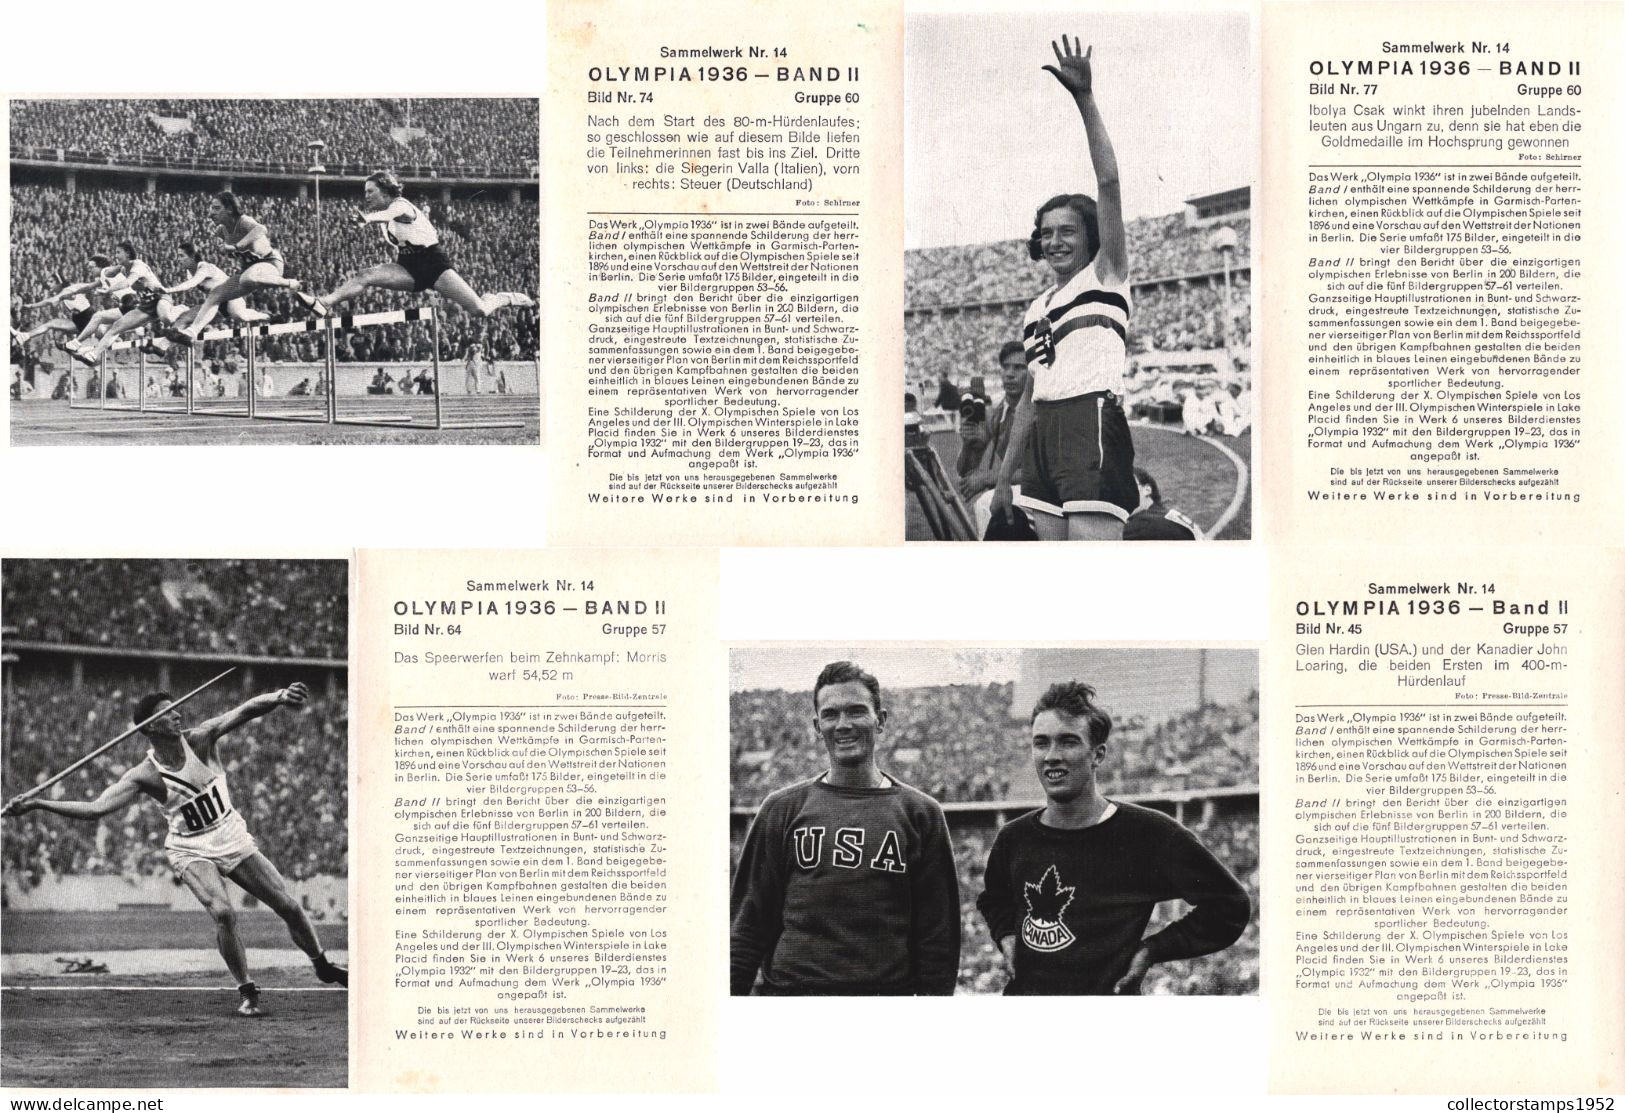 SPORTS, SET OF 71 PIECES, OLYMPIA 1936, BAND II, ED. VOL. 14., BERLIN, STADION, FLAG, BOAT, ARCHITECTURE, HORSE, GERMANY - Olympische Spelen